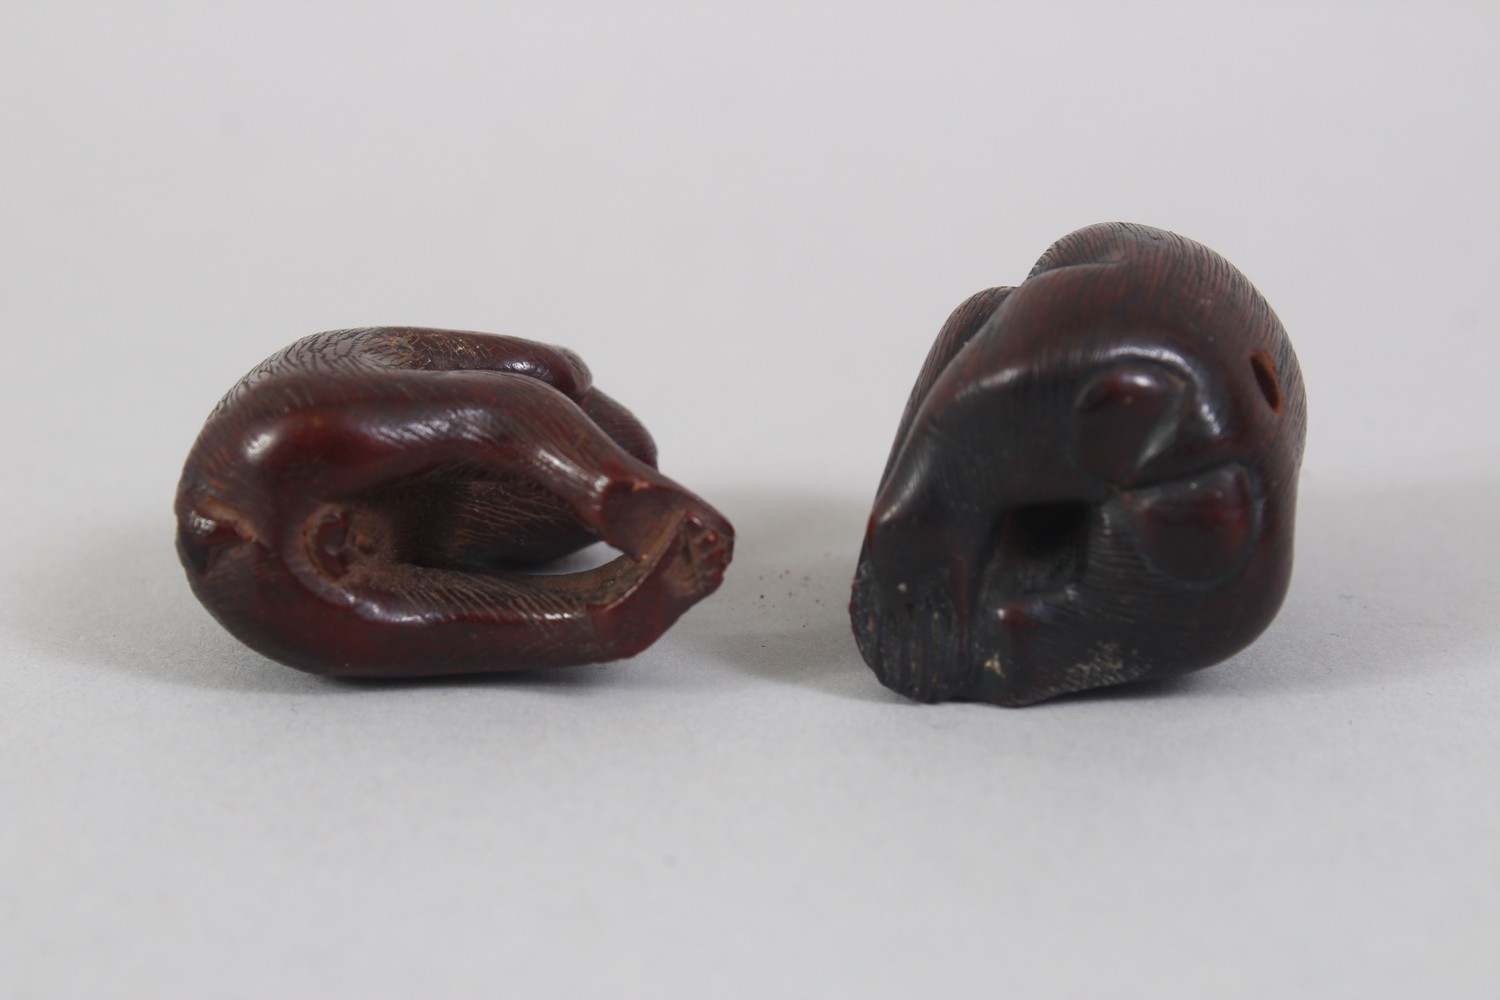 TWO GOOD JAPANESE MEIJI PERIOD CARVED WOODEN NETSUKE OF MONKEYS, both monkeys in seated positions - Image 4 of 4